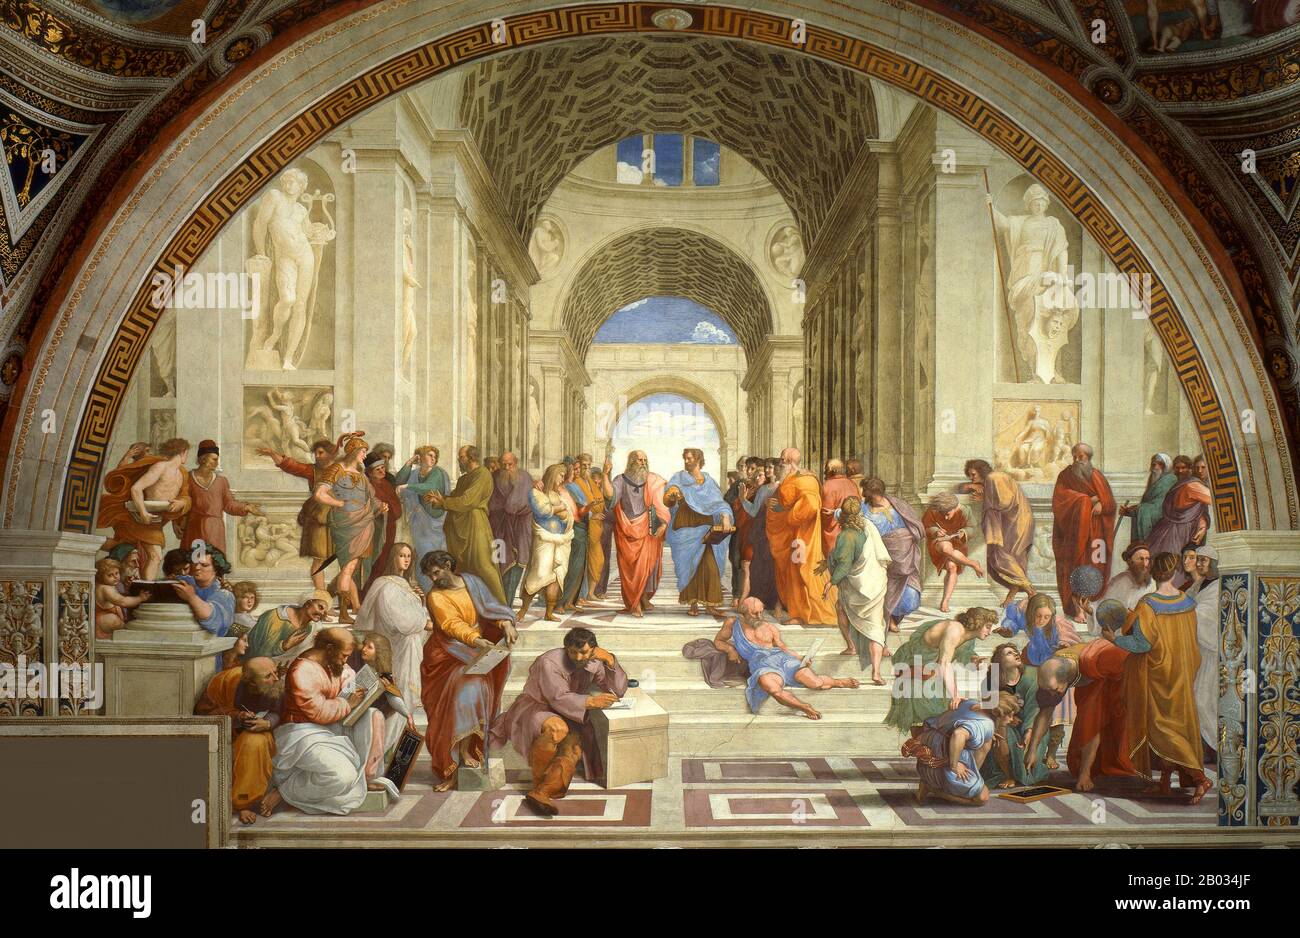 'The School of Athens', or Scuola di Atene in Italian, is one of the most famous frescoes by the Italian Renaissance artist Raphael. It was painted between 1509 and 1511 as a part of Raphael's commission to decorate with frescoes the rooms now known as the Stanze di Raffaello, in the Apostolic Palace in the Vatican.  The Stanza della Segnatura was the first of the rooms to be decorated, and 'The School of Athens' the second painting to be finished there, after 'La Disputa', on the opposite wall. The picture has long been seen as Raphael's masterpiece and the perfect embodiment of the classical Stock Photo